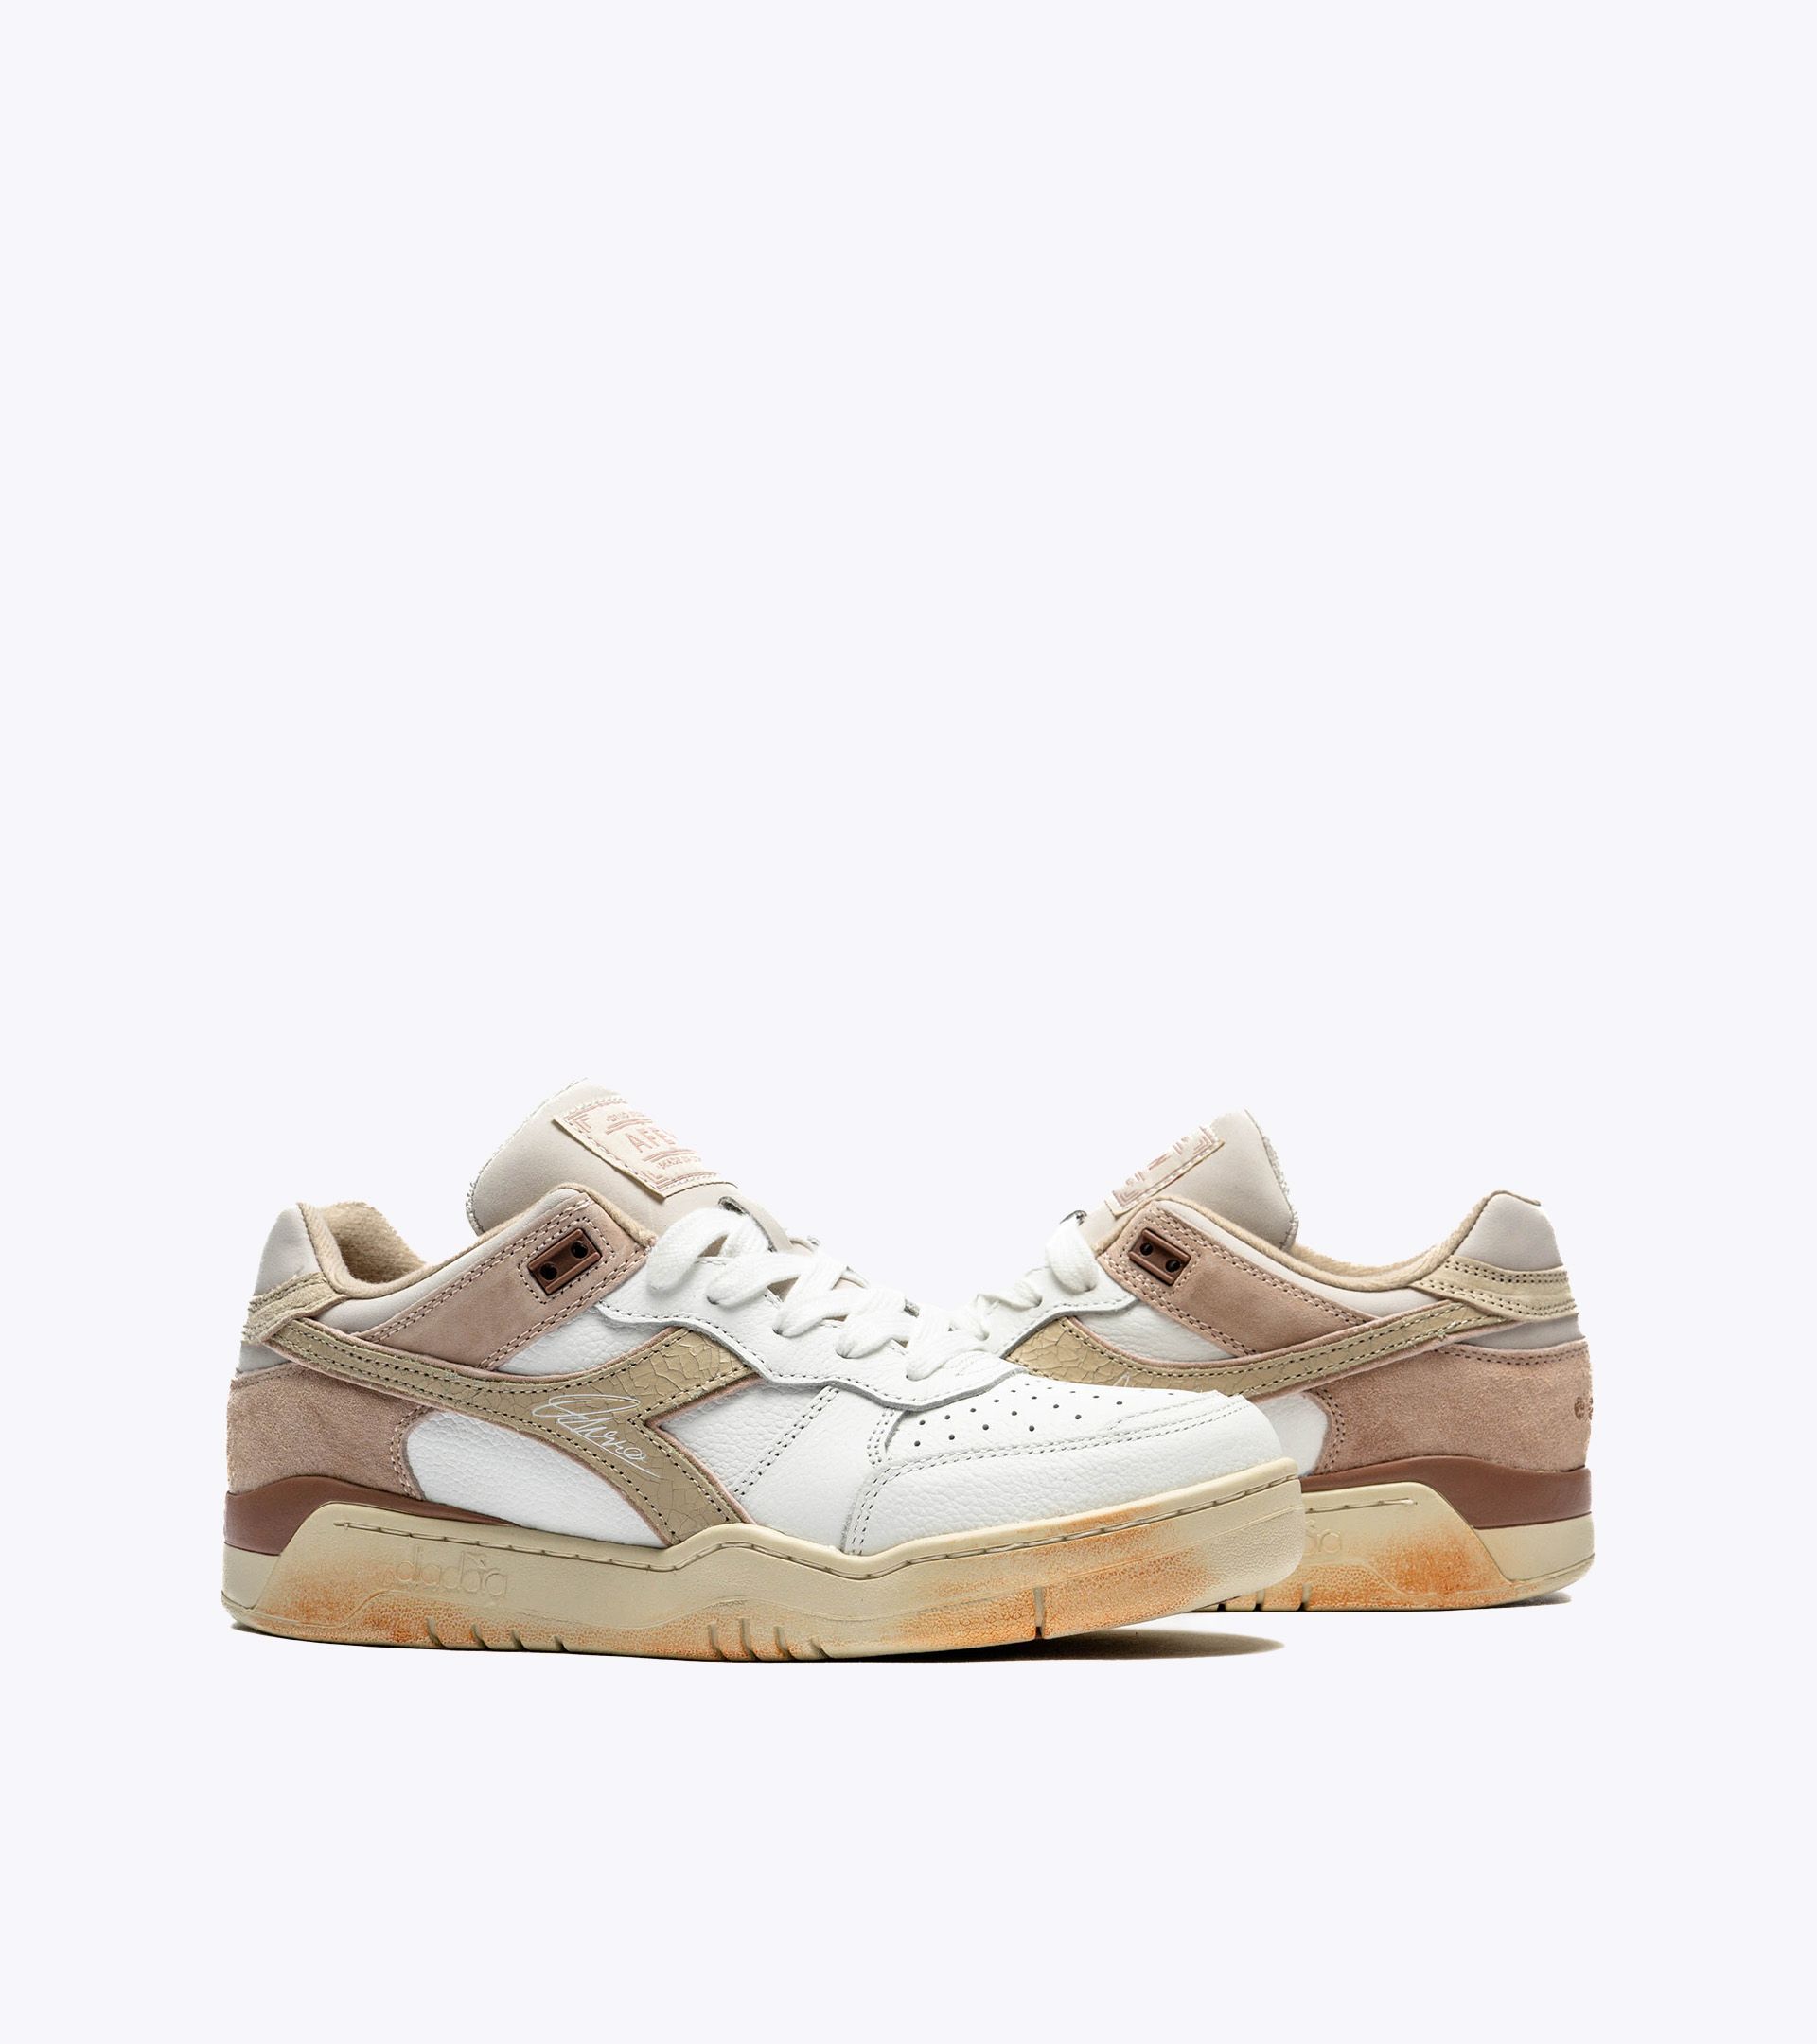 Made in Italy shoe - Gender neutral B.560 DINO RUSSO WHITE/SANDSHELL - Diadora